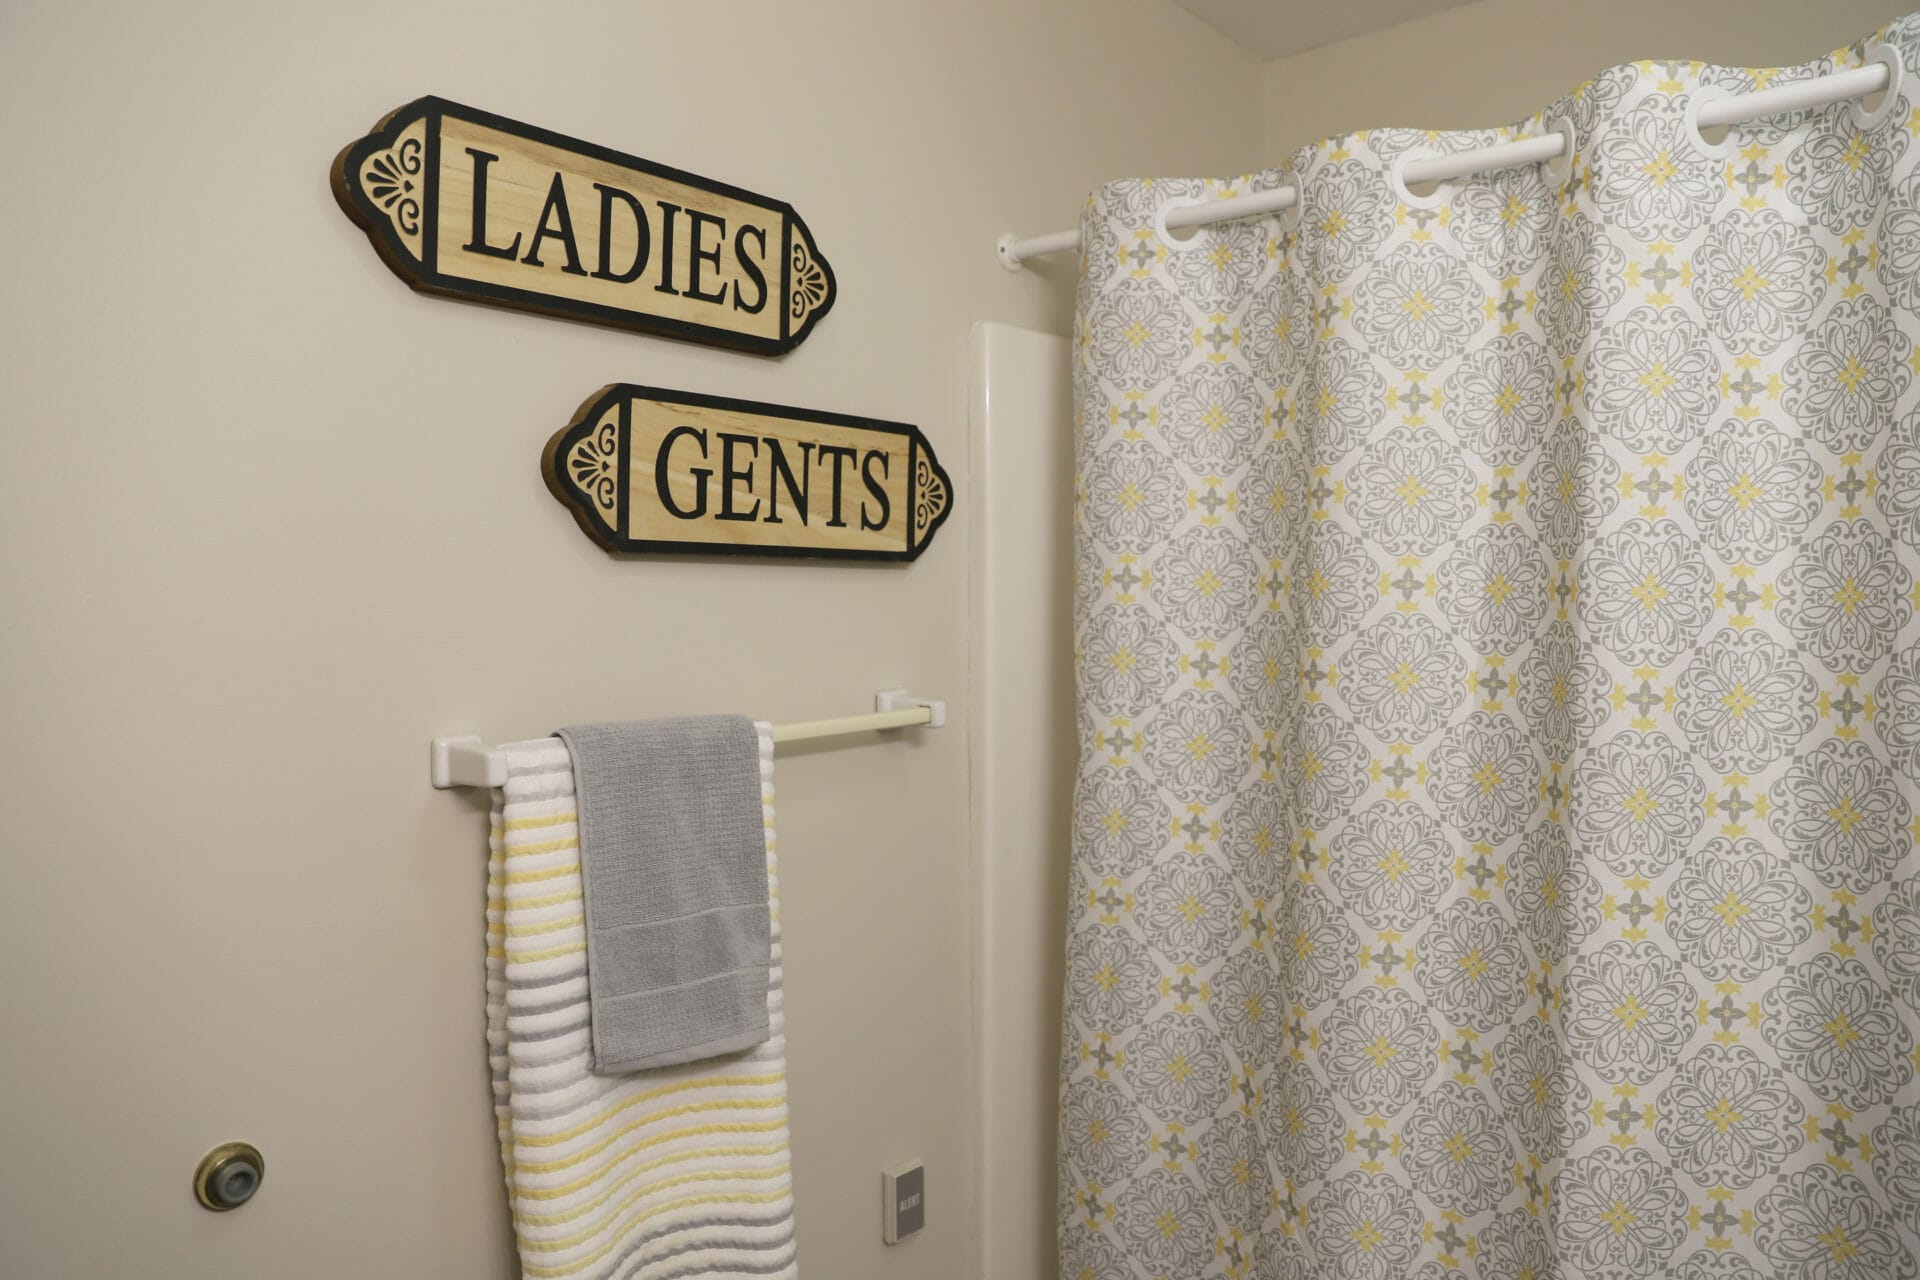 <span  class="uc_style_uc_tiles_grid_image_elementor_uc_items_attribute_title" style="color:#000000;">Signage in the bathroom at Rosegate Garden Homes.</span>